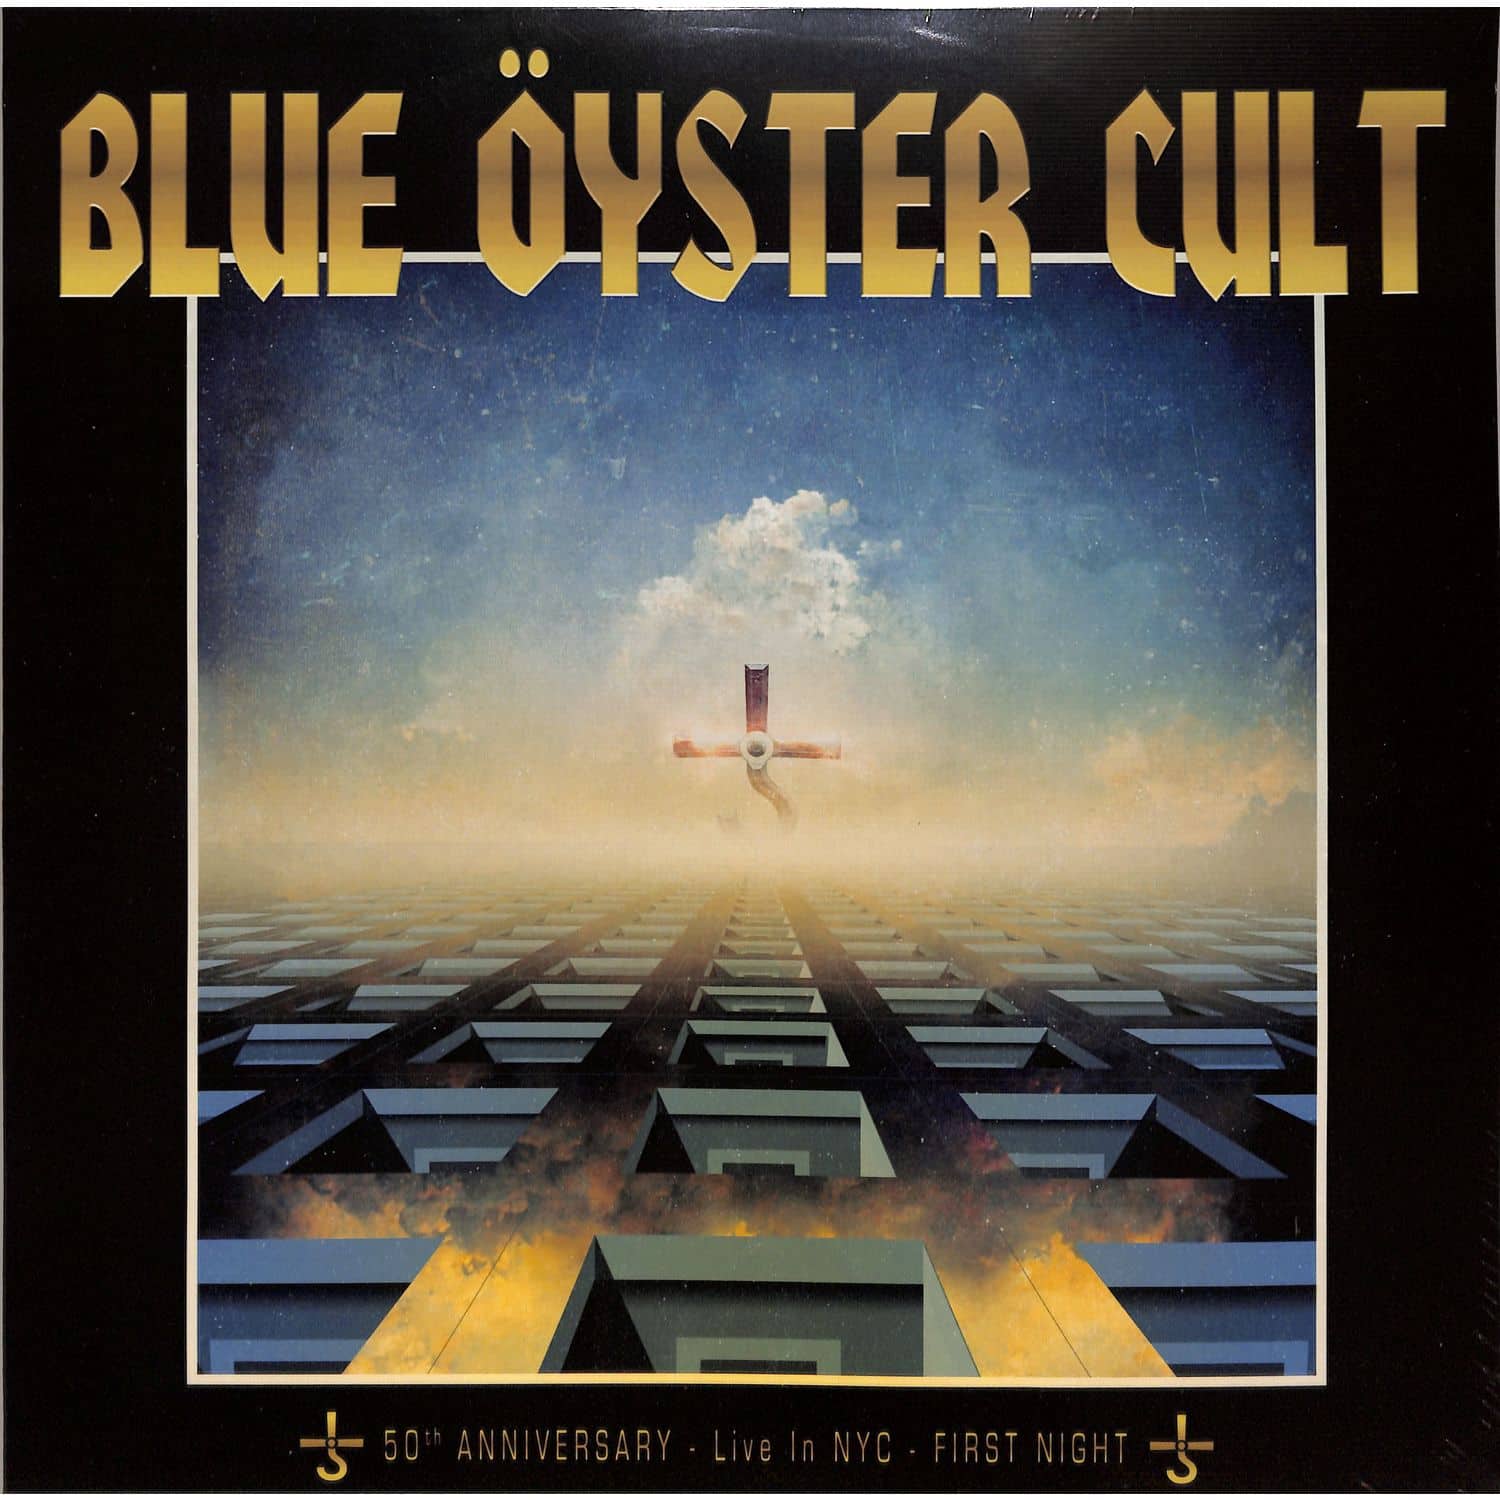 Blue yster Cult - 50TH ANNIVERSARY LIVE- FIRST NIGHT 